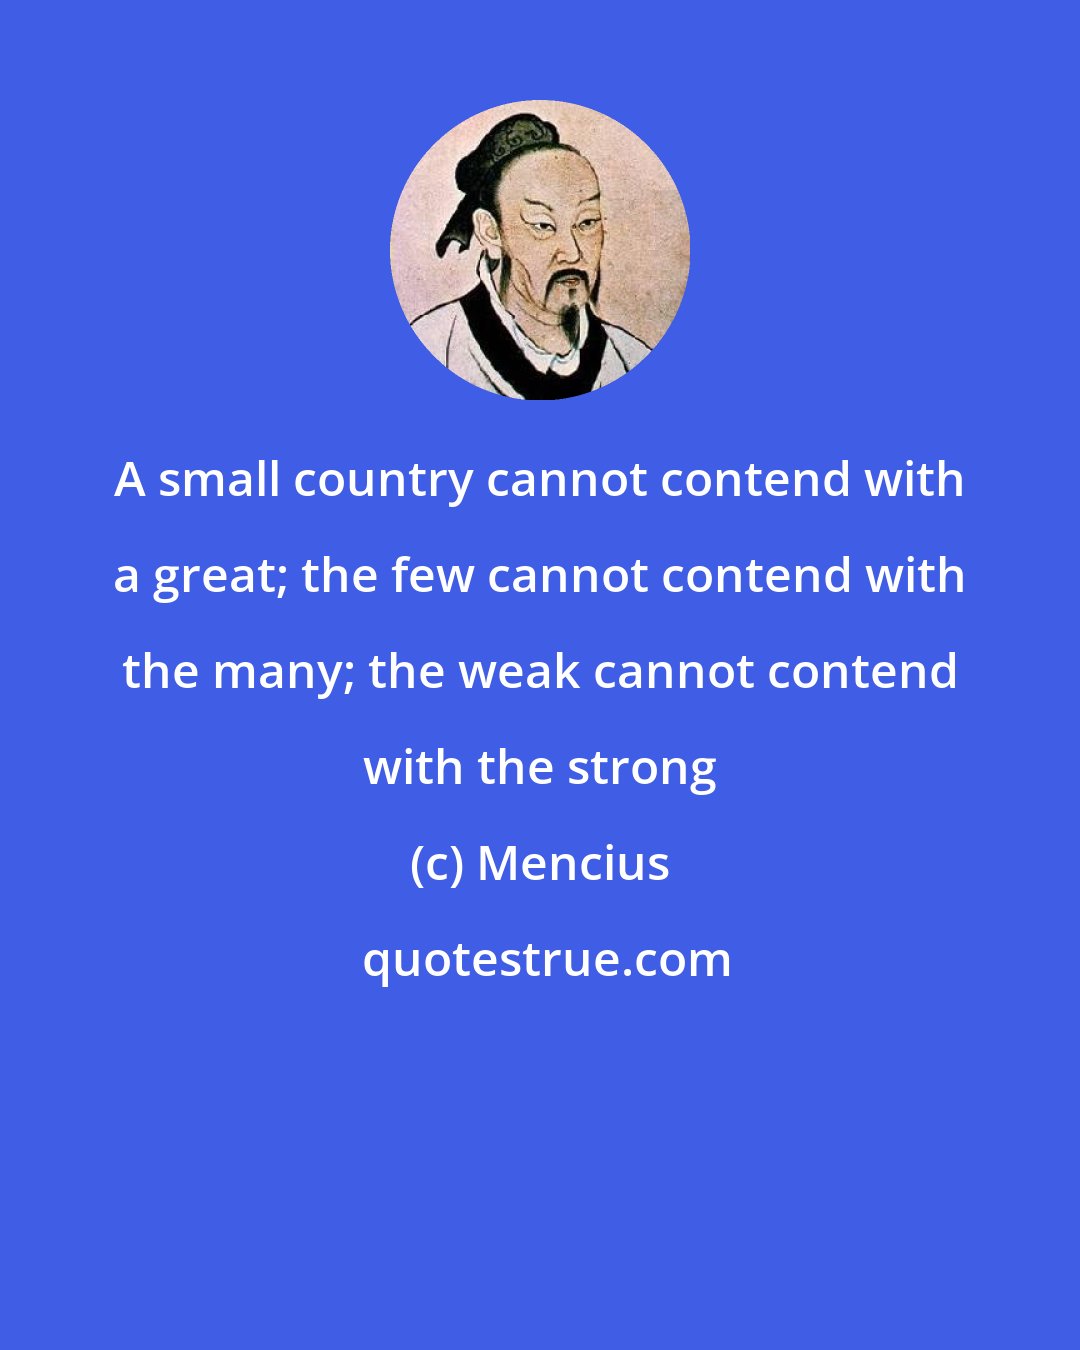 Mencius: A small country cannot contend with a great; the few cannot contend with the many; the weak cannot contend with the strong